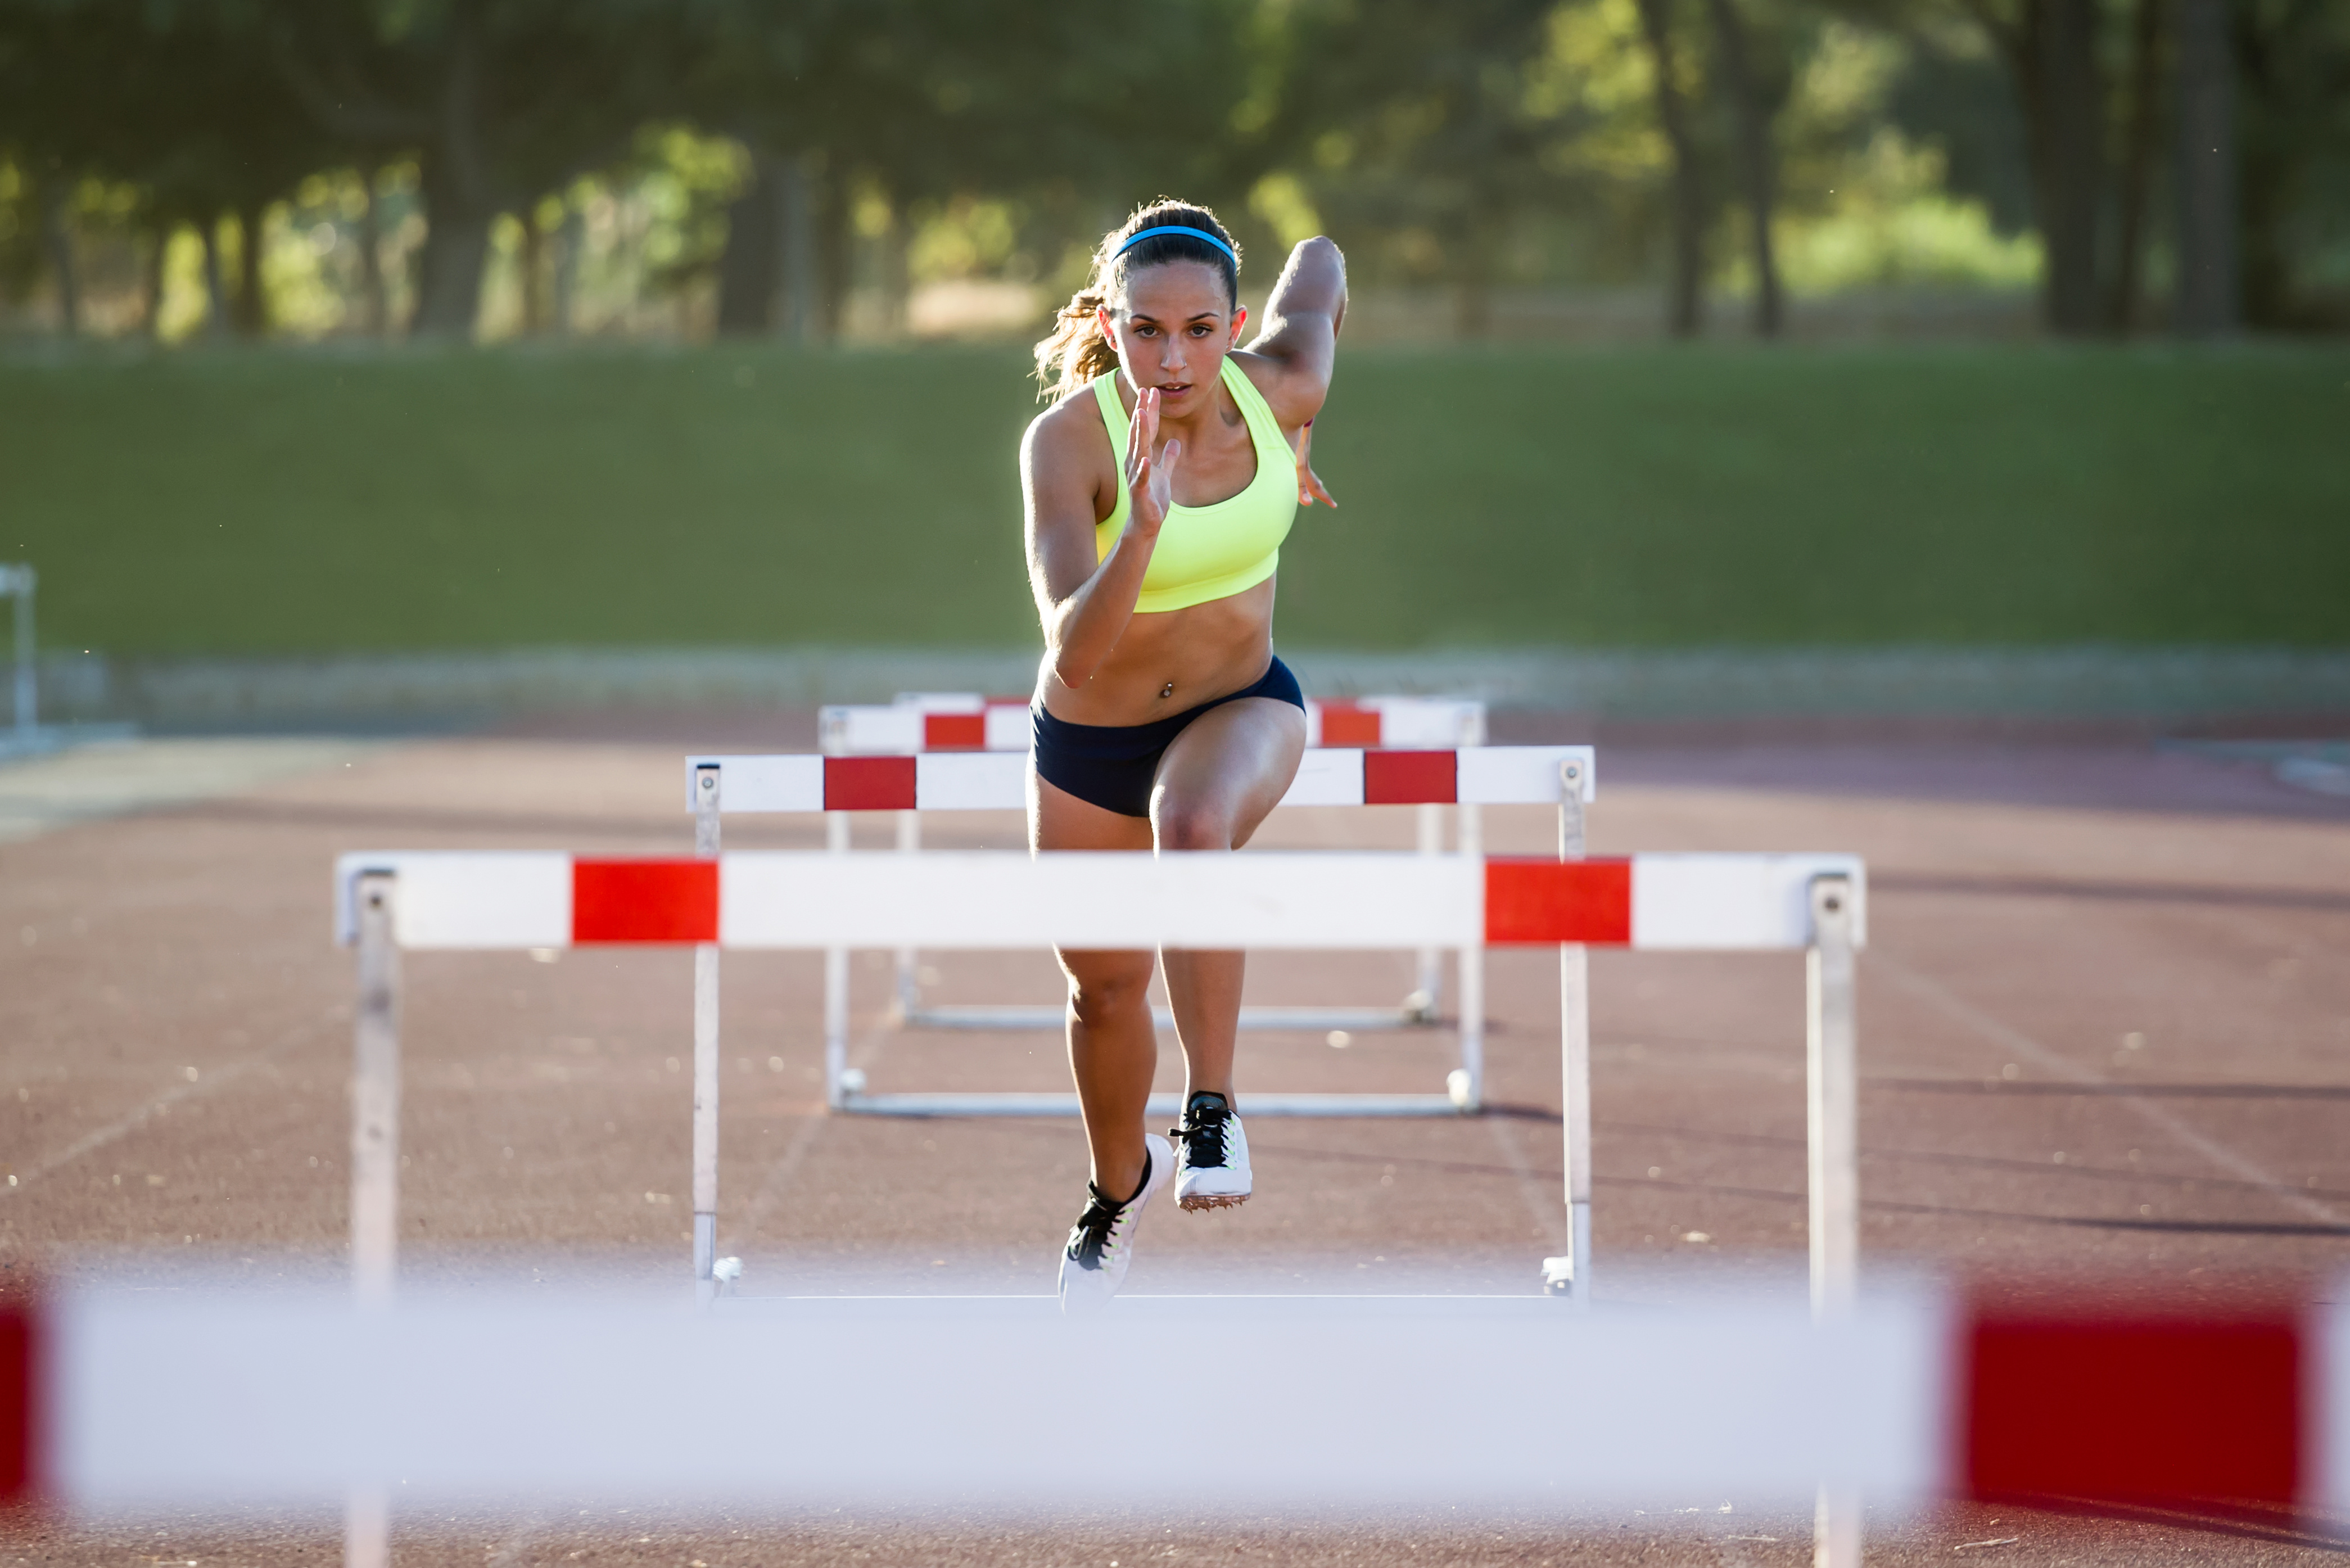 Female runner who is approaching a hurdle preparing to jump.